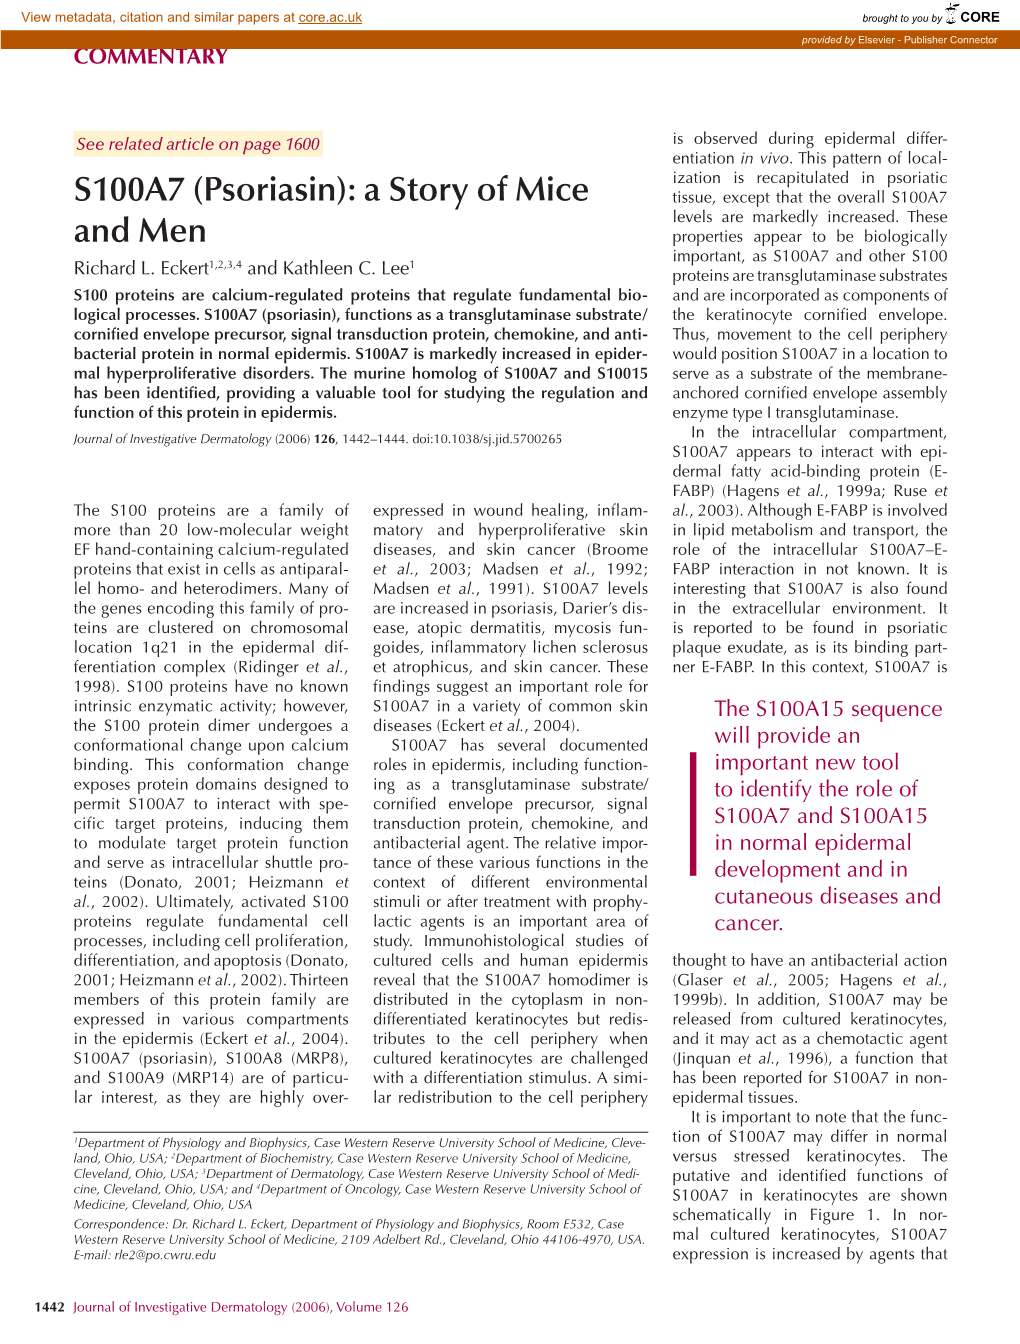 S100A7 (Psoriasin): a Story of Mice Tissue, Except That the Overall S100A7 Levels Are Markedly Increased